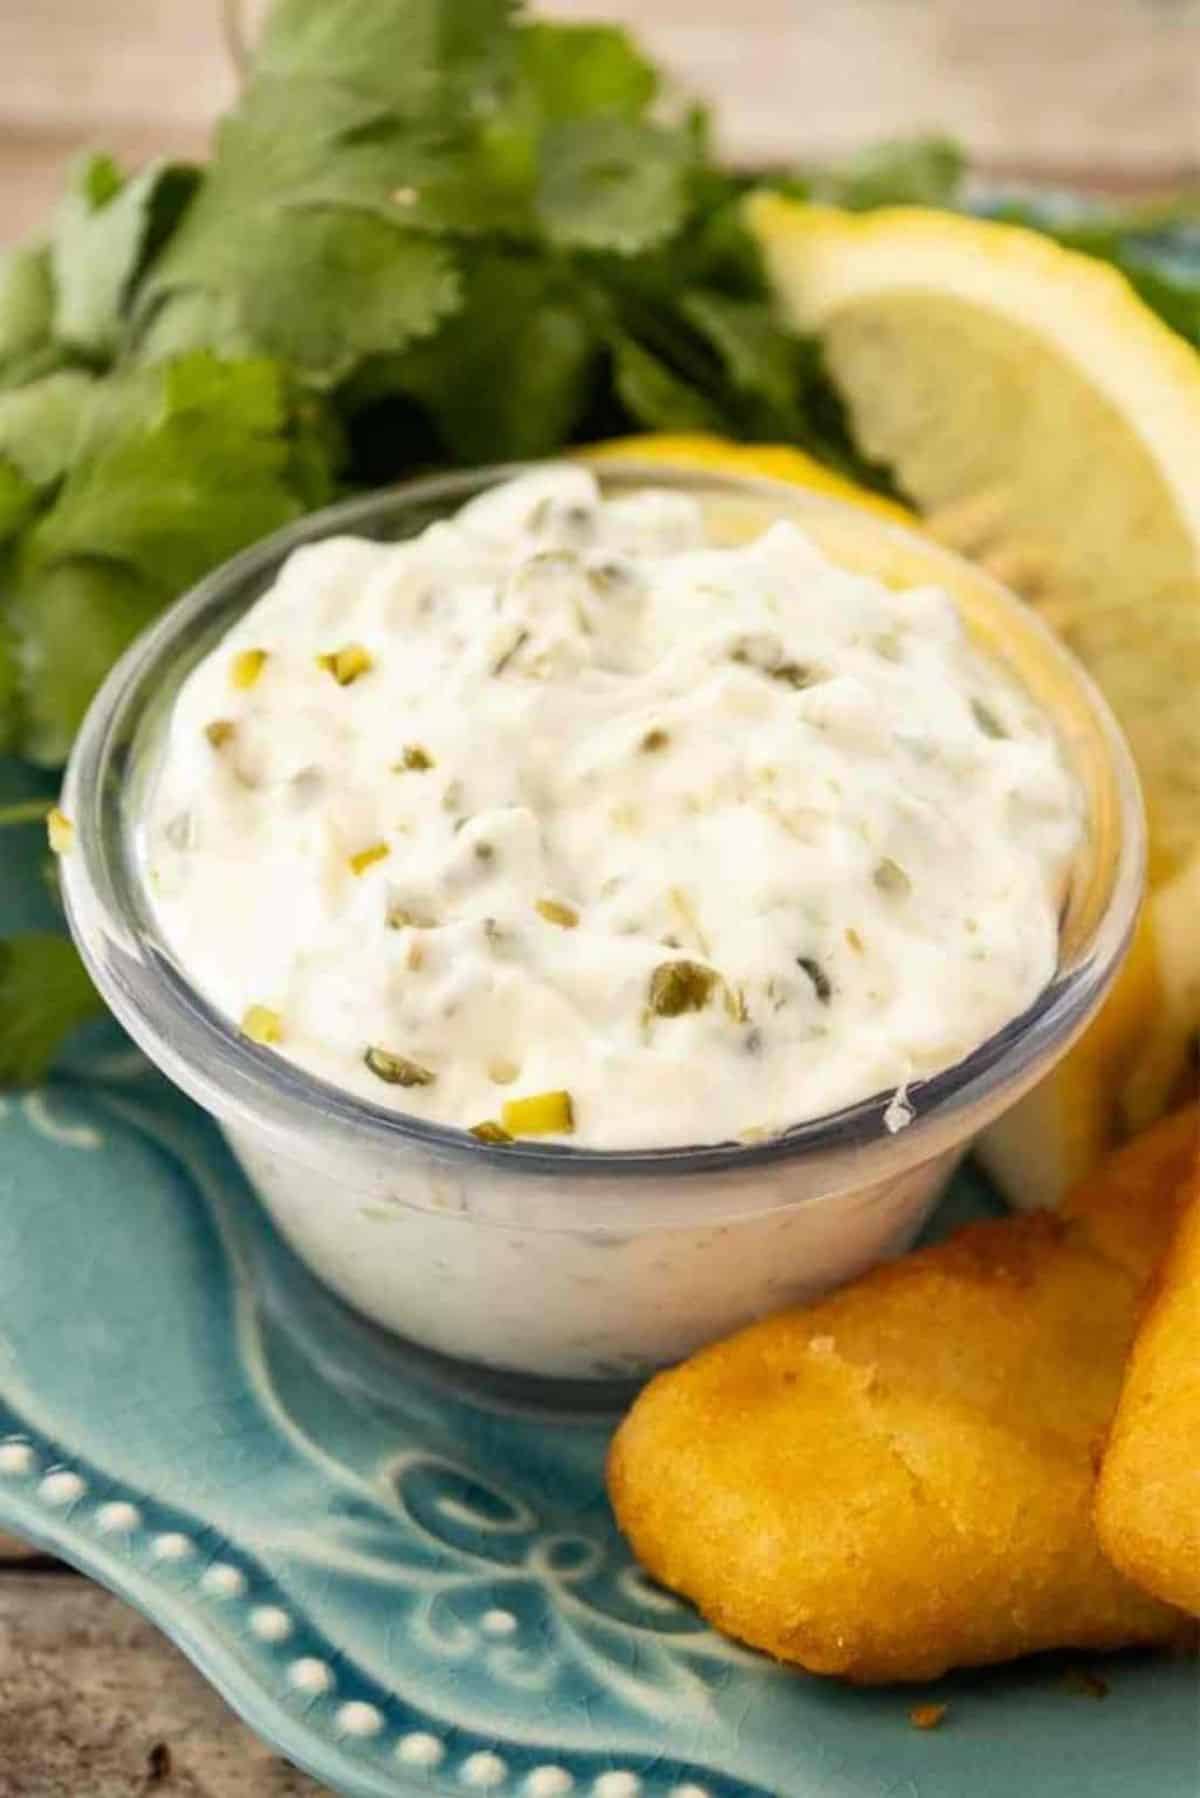 Creamy Dill Pickle Tartar Sauce in a small glass bowl.